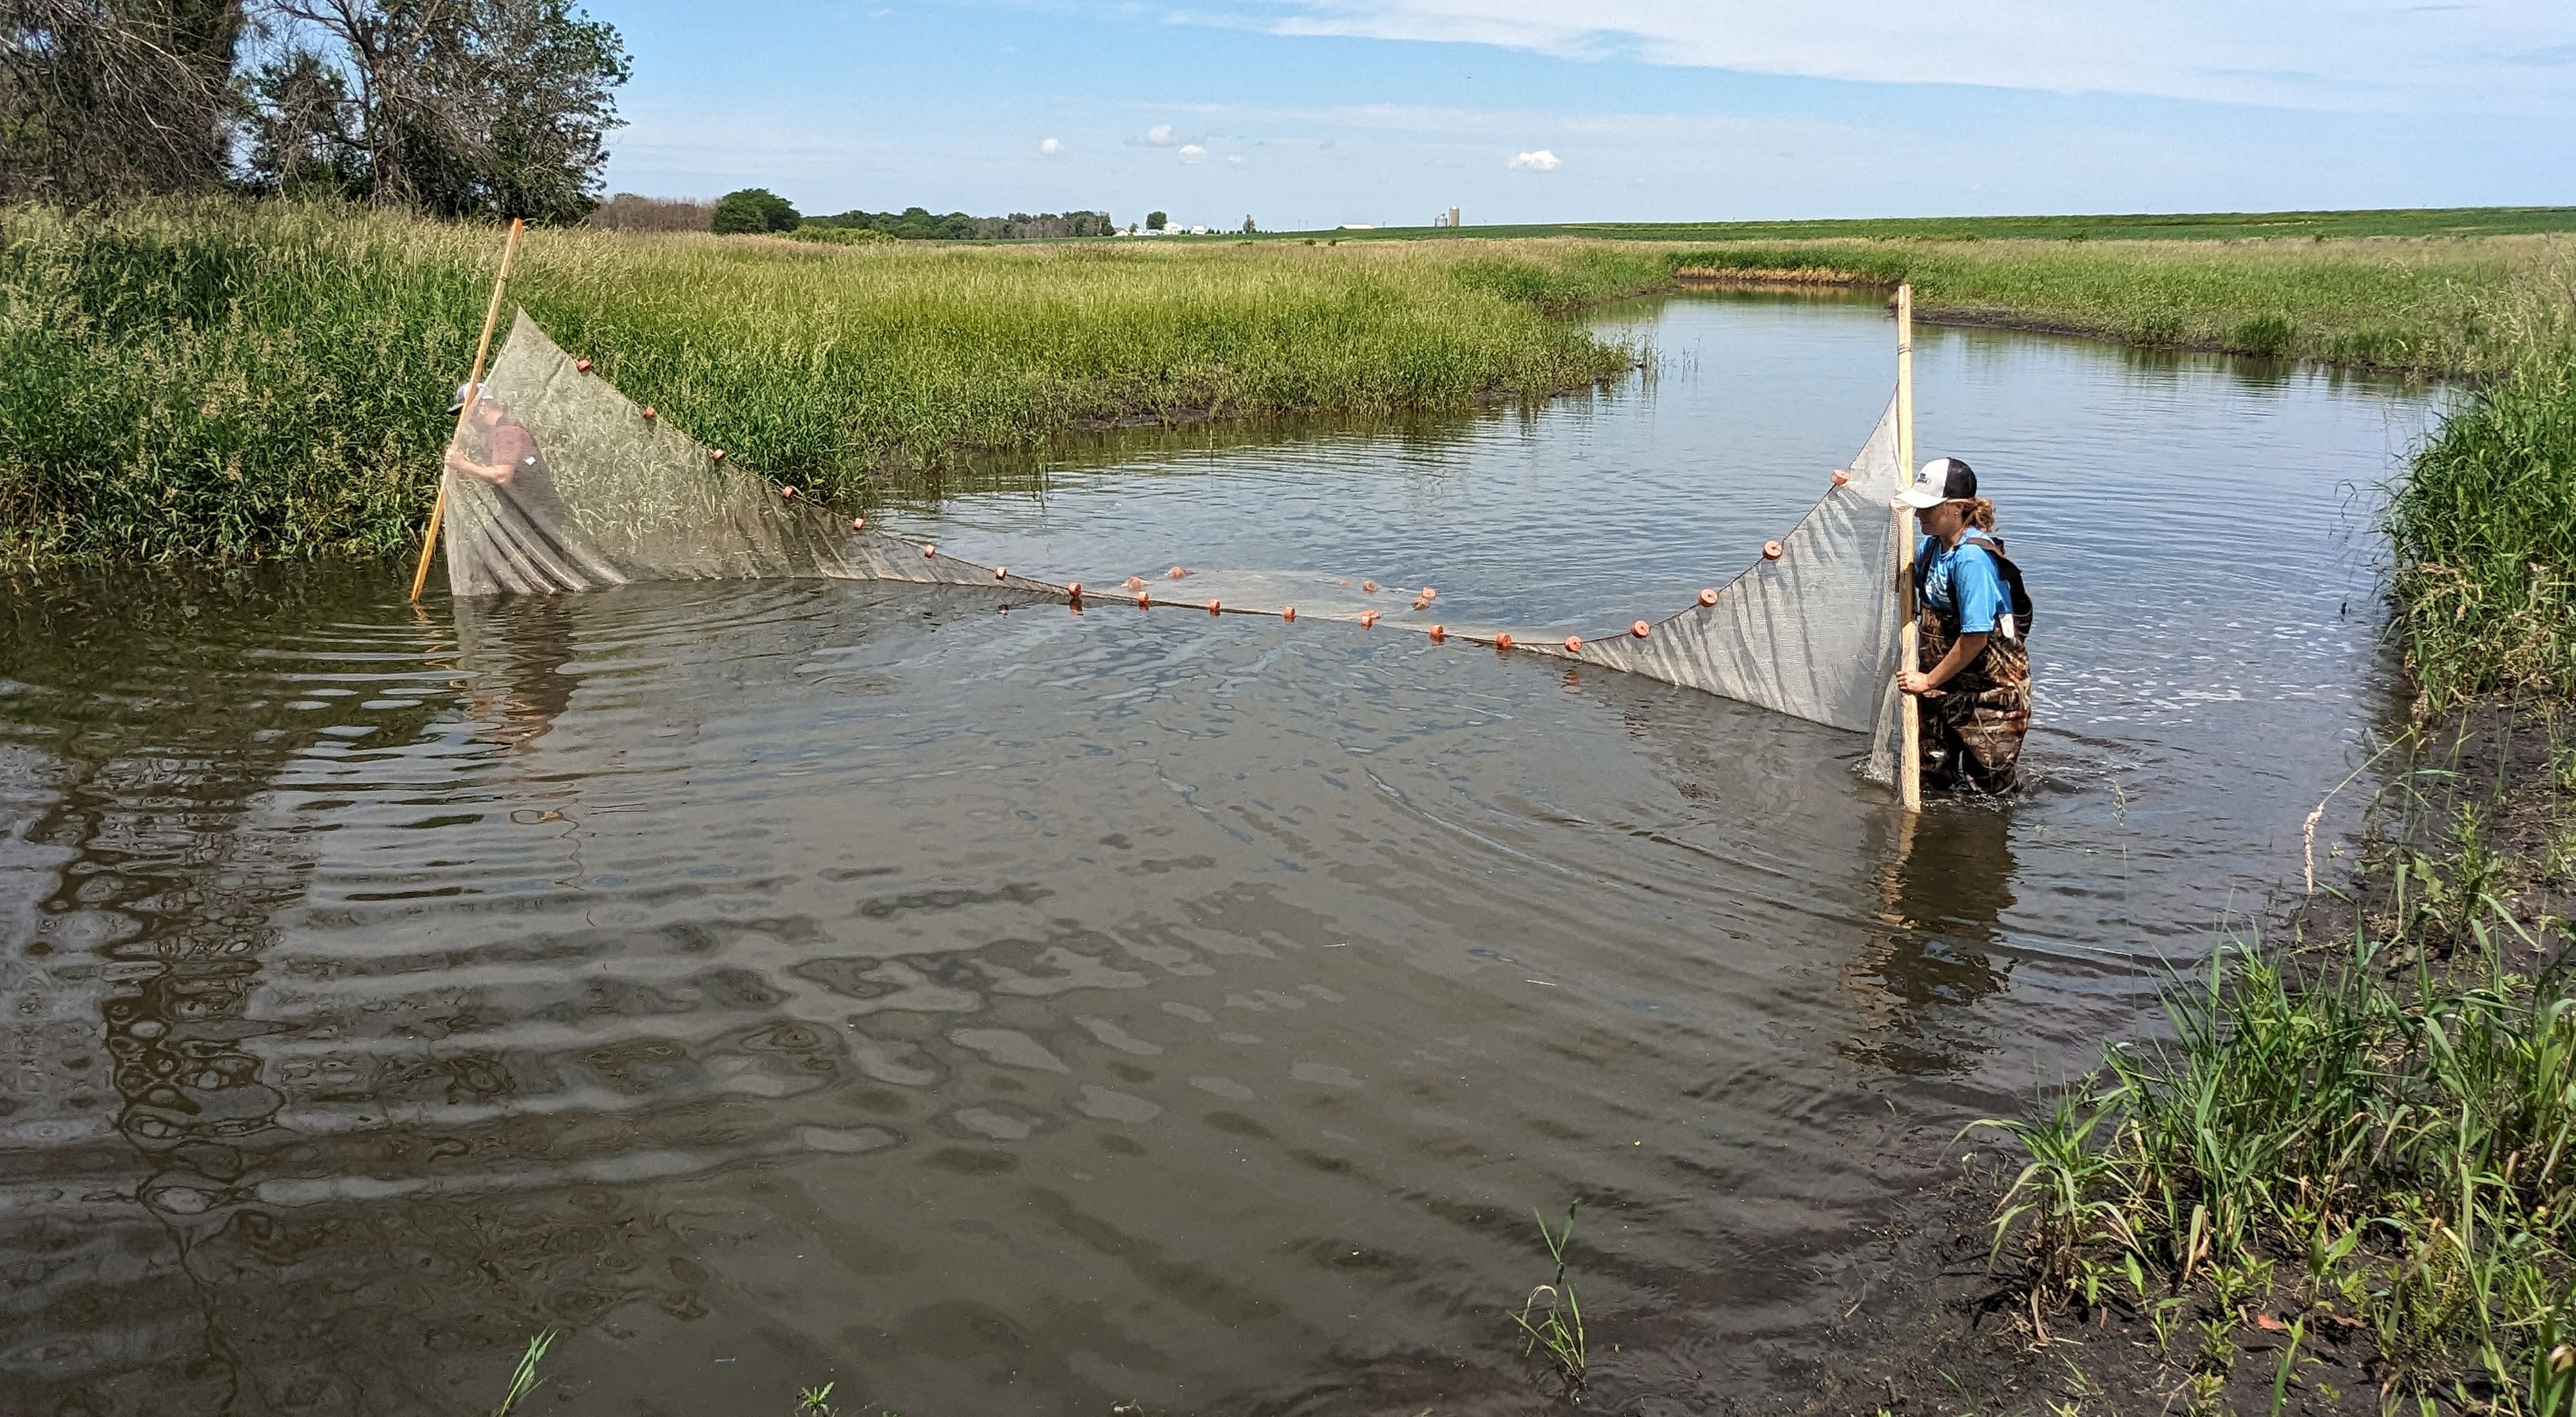 Scientists are sampling wildlife in a restored oxbow wetland with a sizeable sein net.